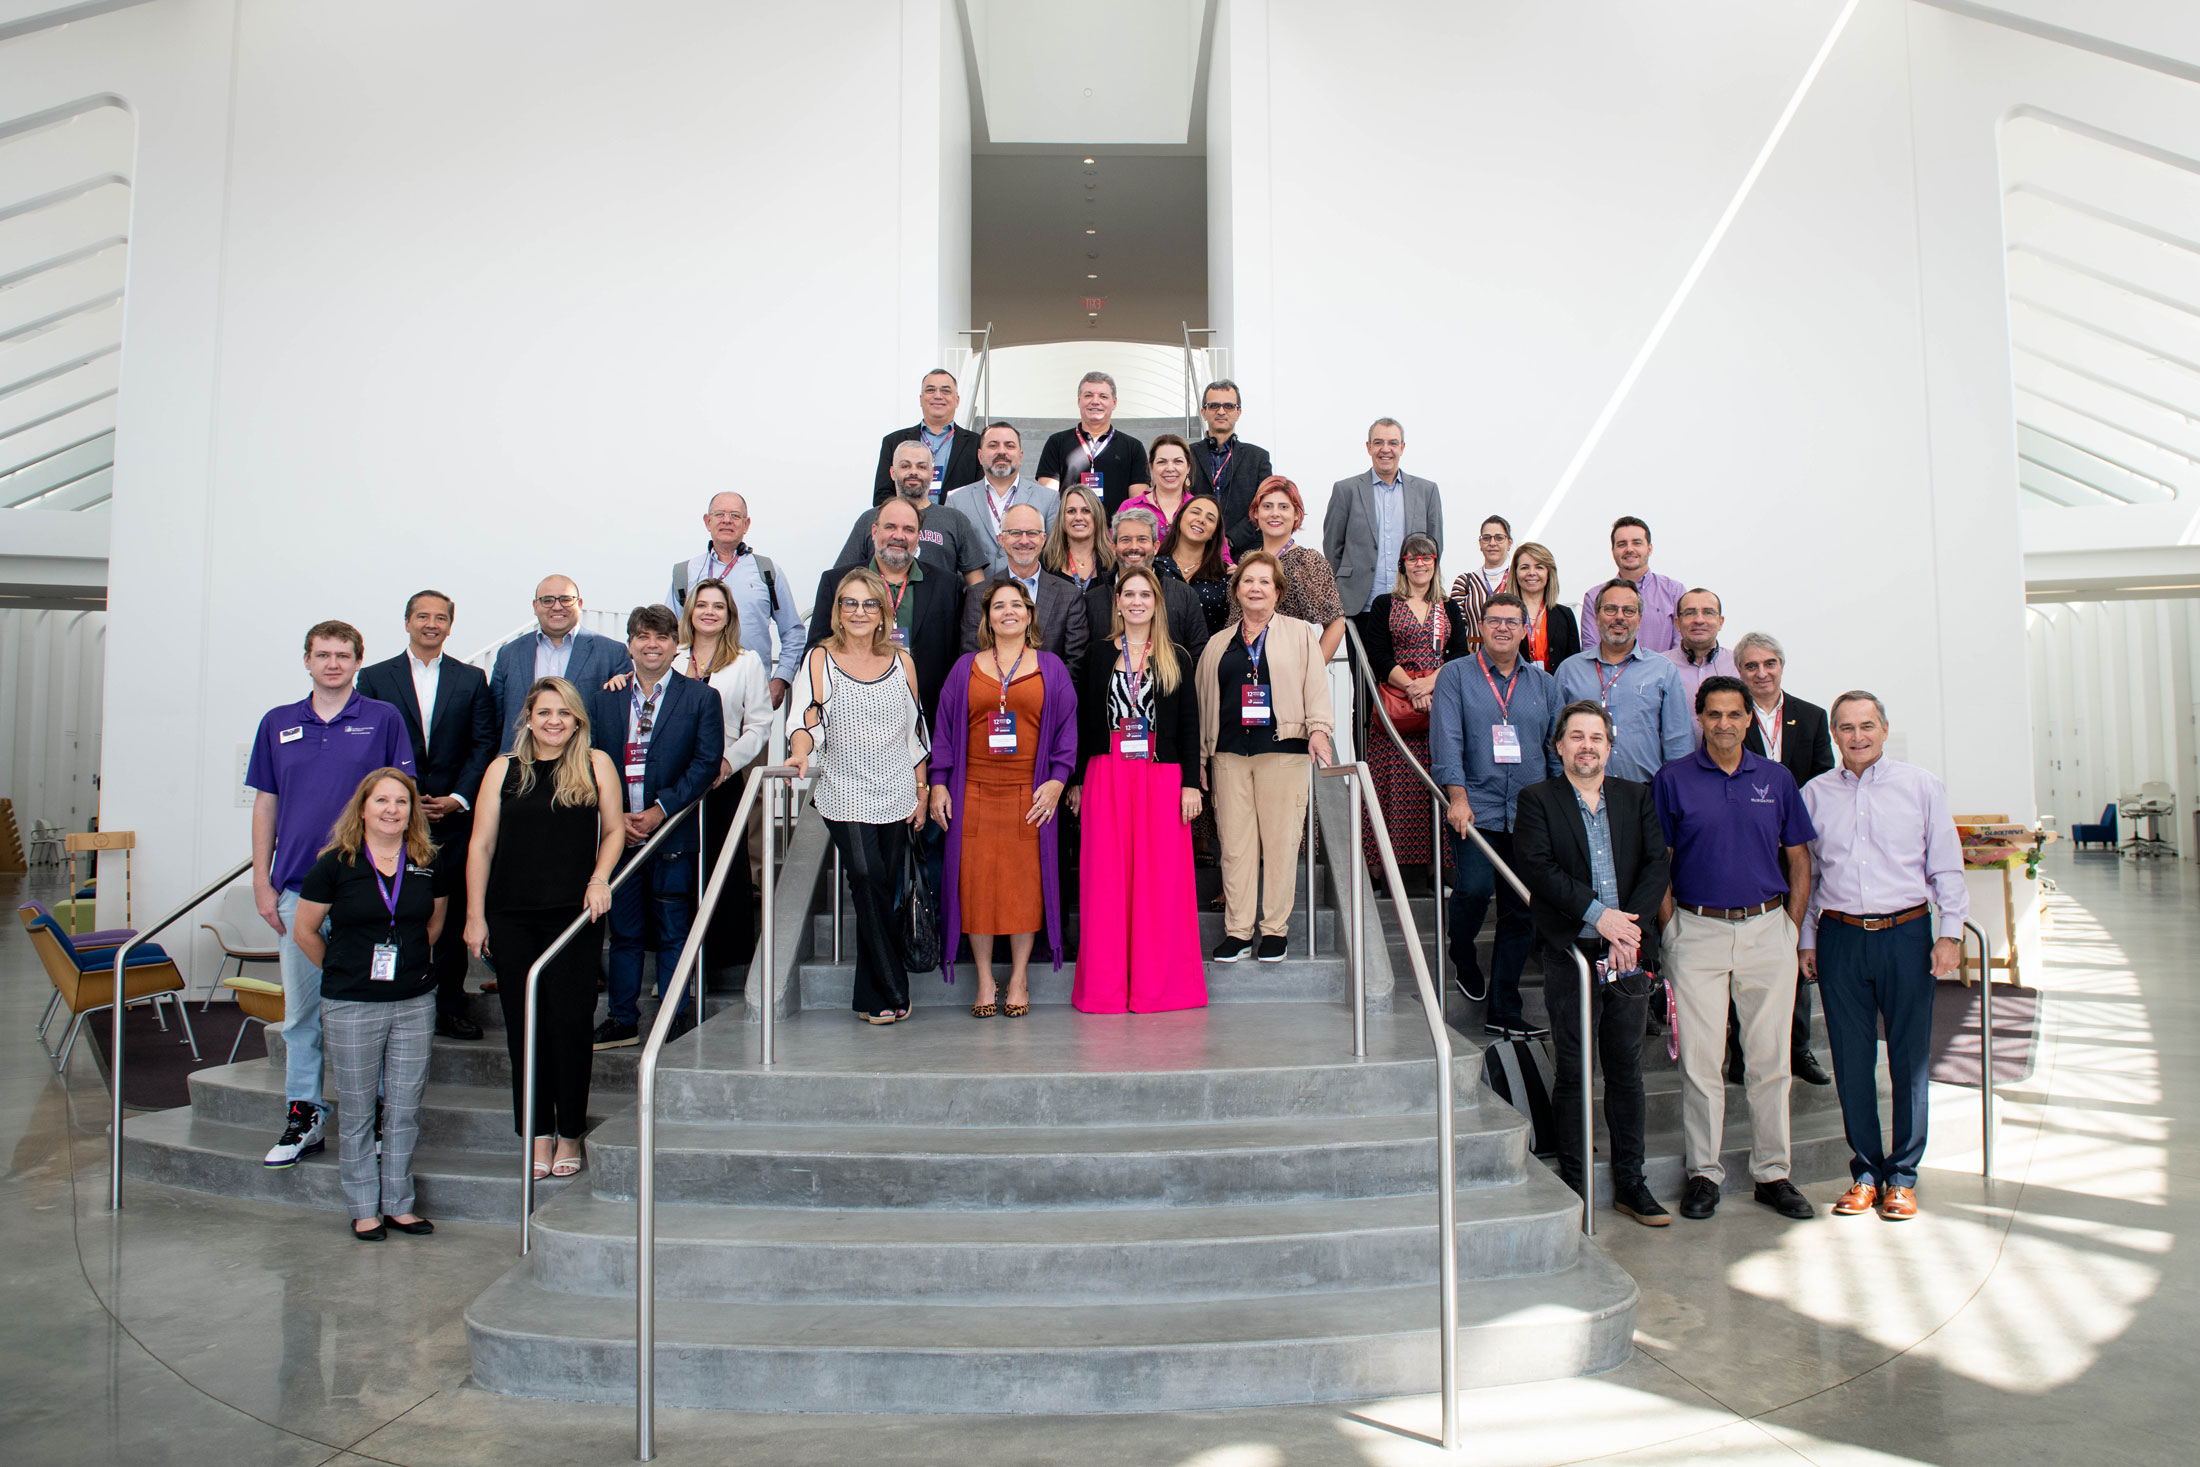 Brazilian university leaders learn innovation, technology trends at Florida Poly